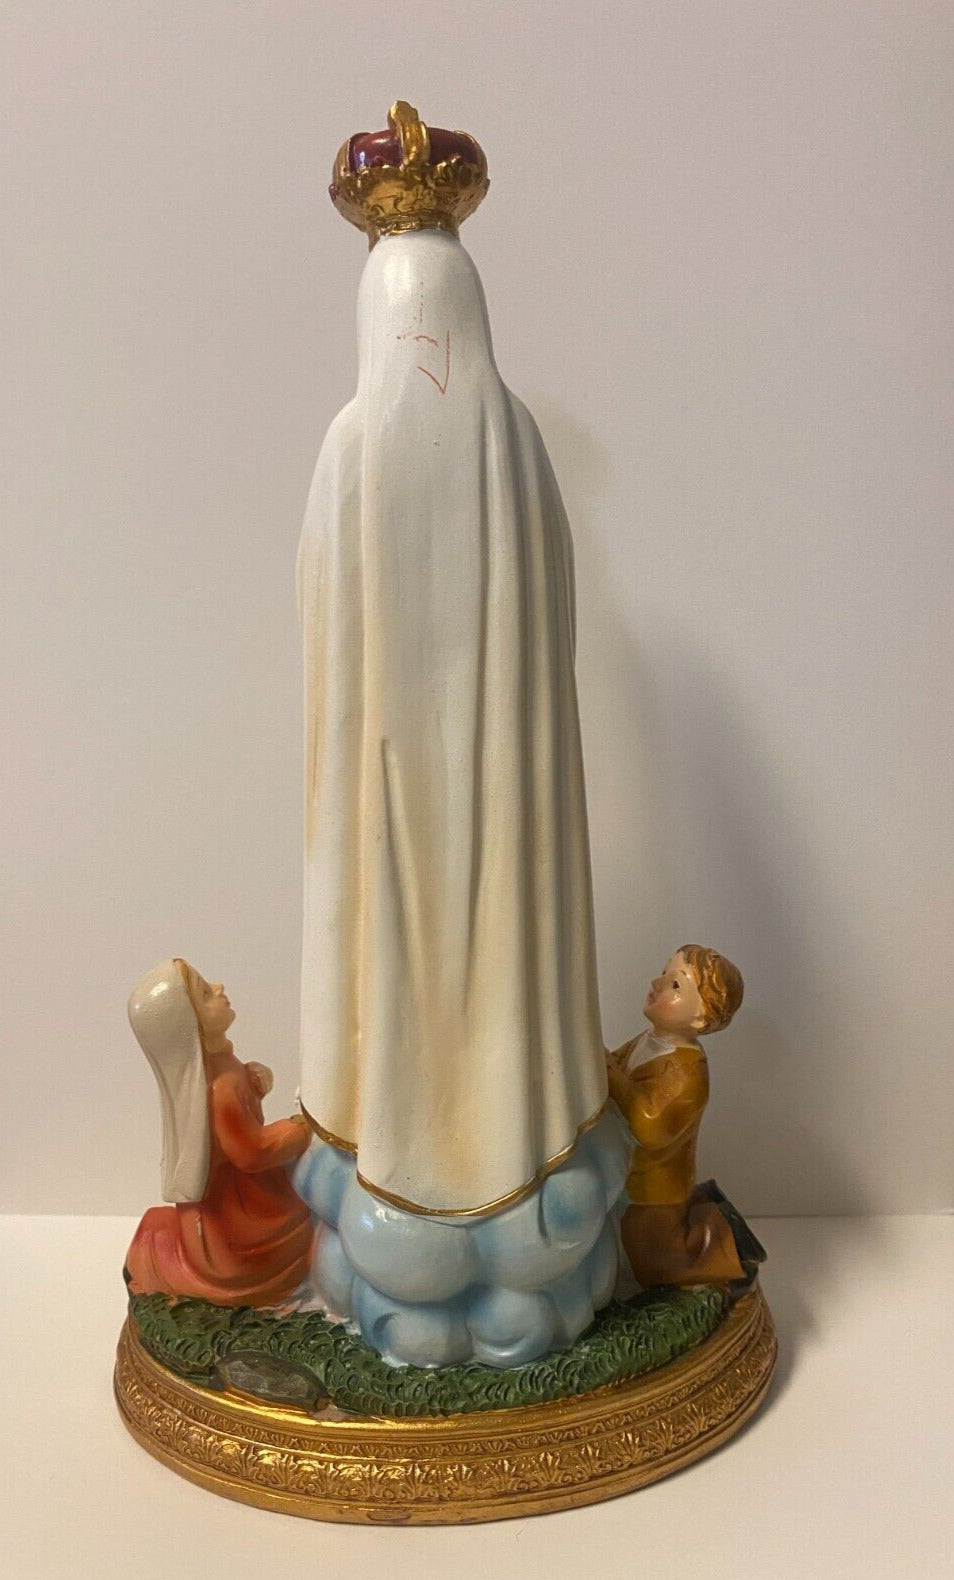 Our Lady of Fatima with Children 8" Statue, New - Bob and Penny Lord